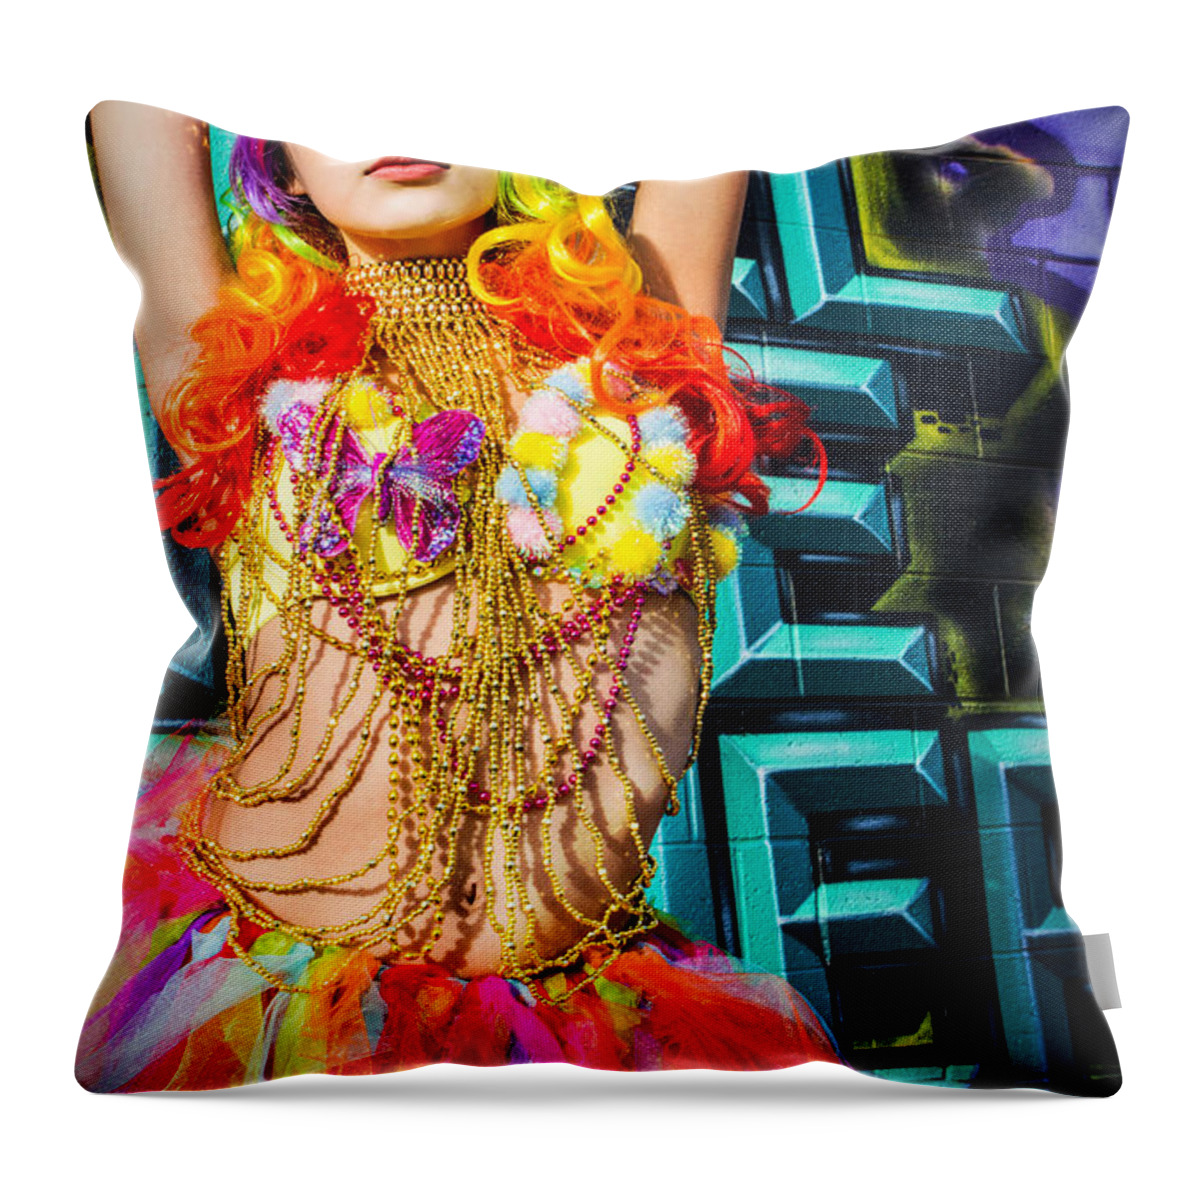 Woman Throw Pillow featuring the photograph Electric Ballerina by Ryan Smith